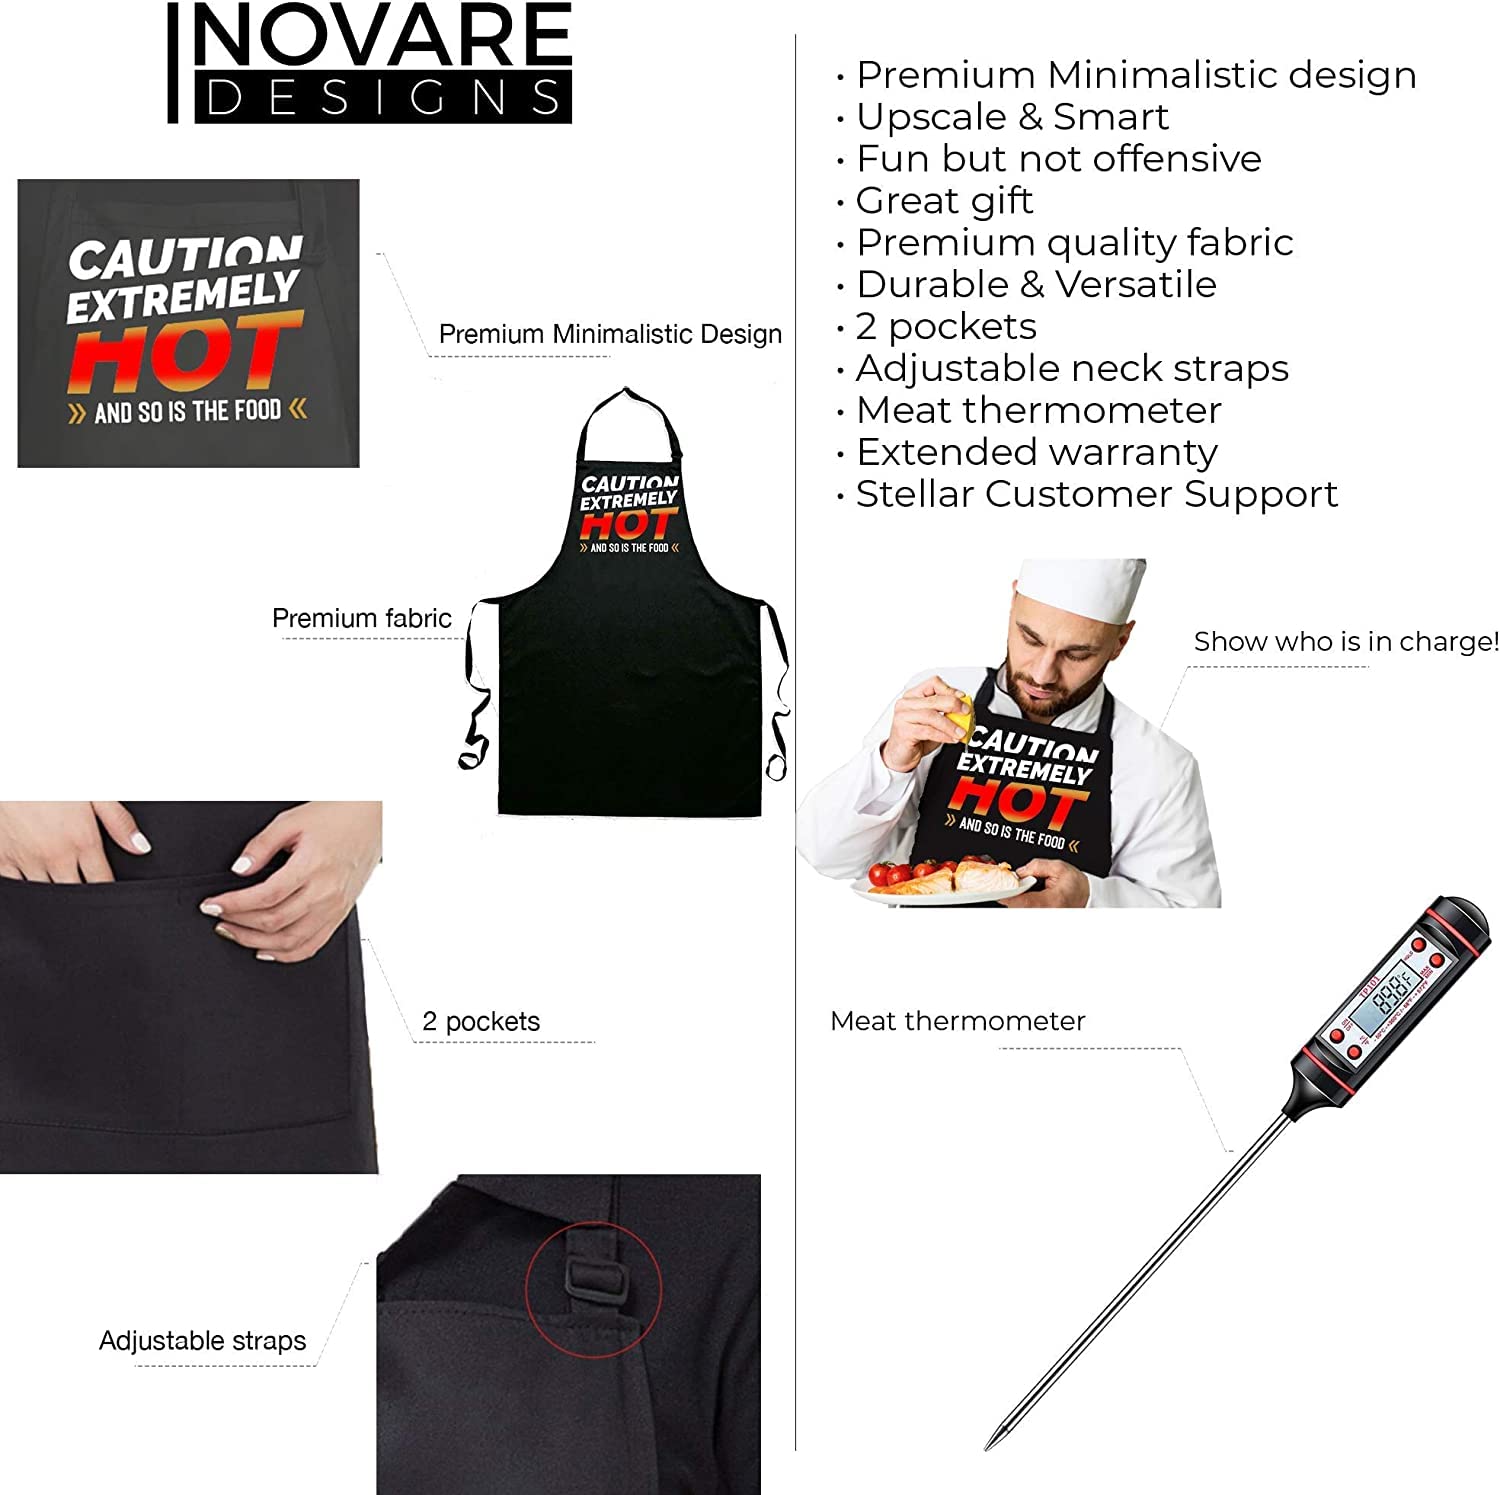 Inovare Designs' Fun Chef Apron - Perfect for Grilling, Cooking, BBQ - Unisex Design - Includes Meat Thermometer - Ideal Kitchen Gift